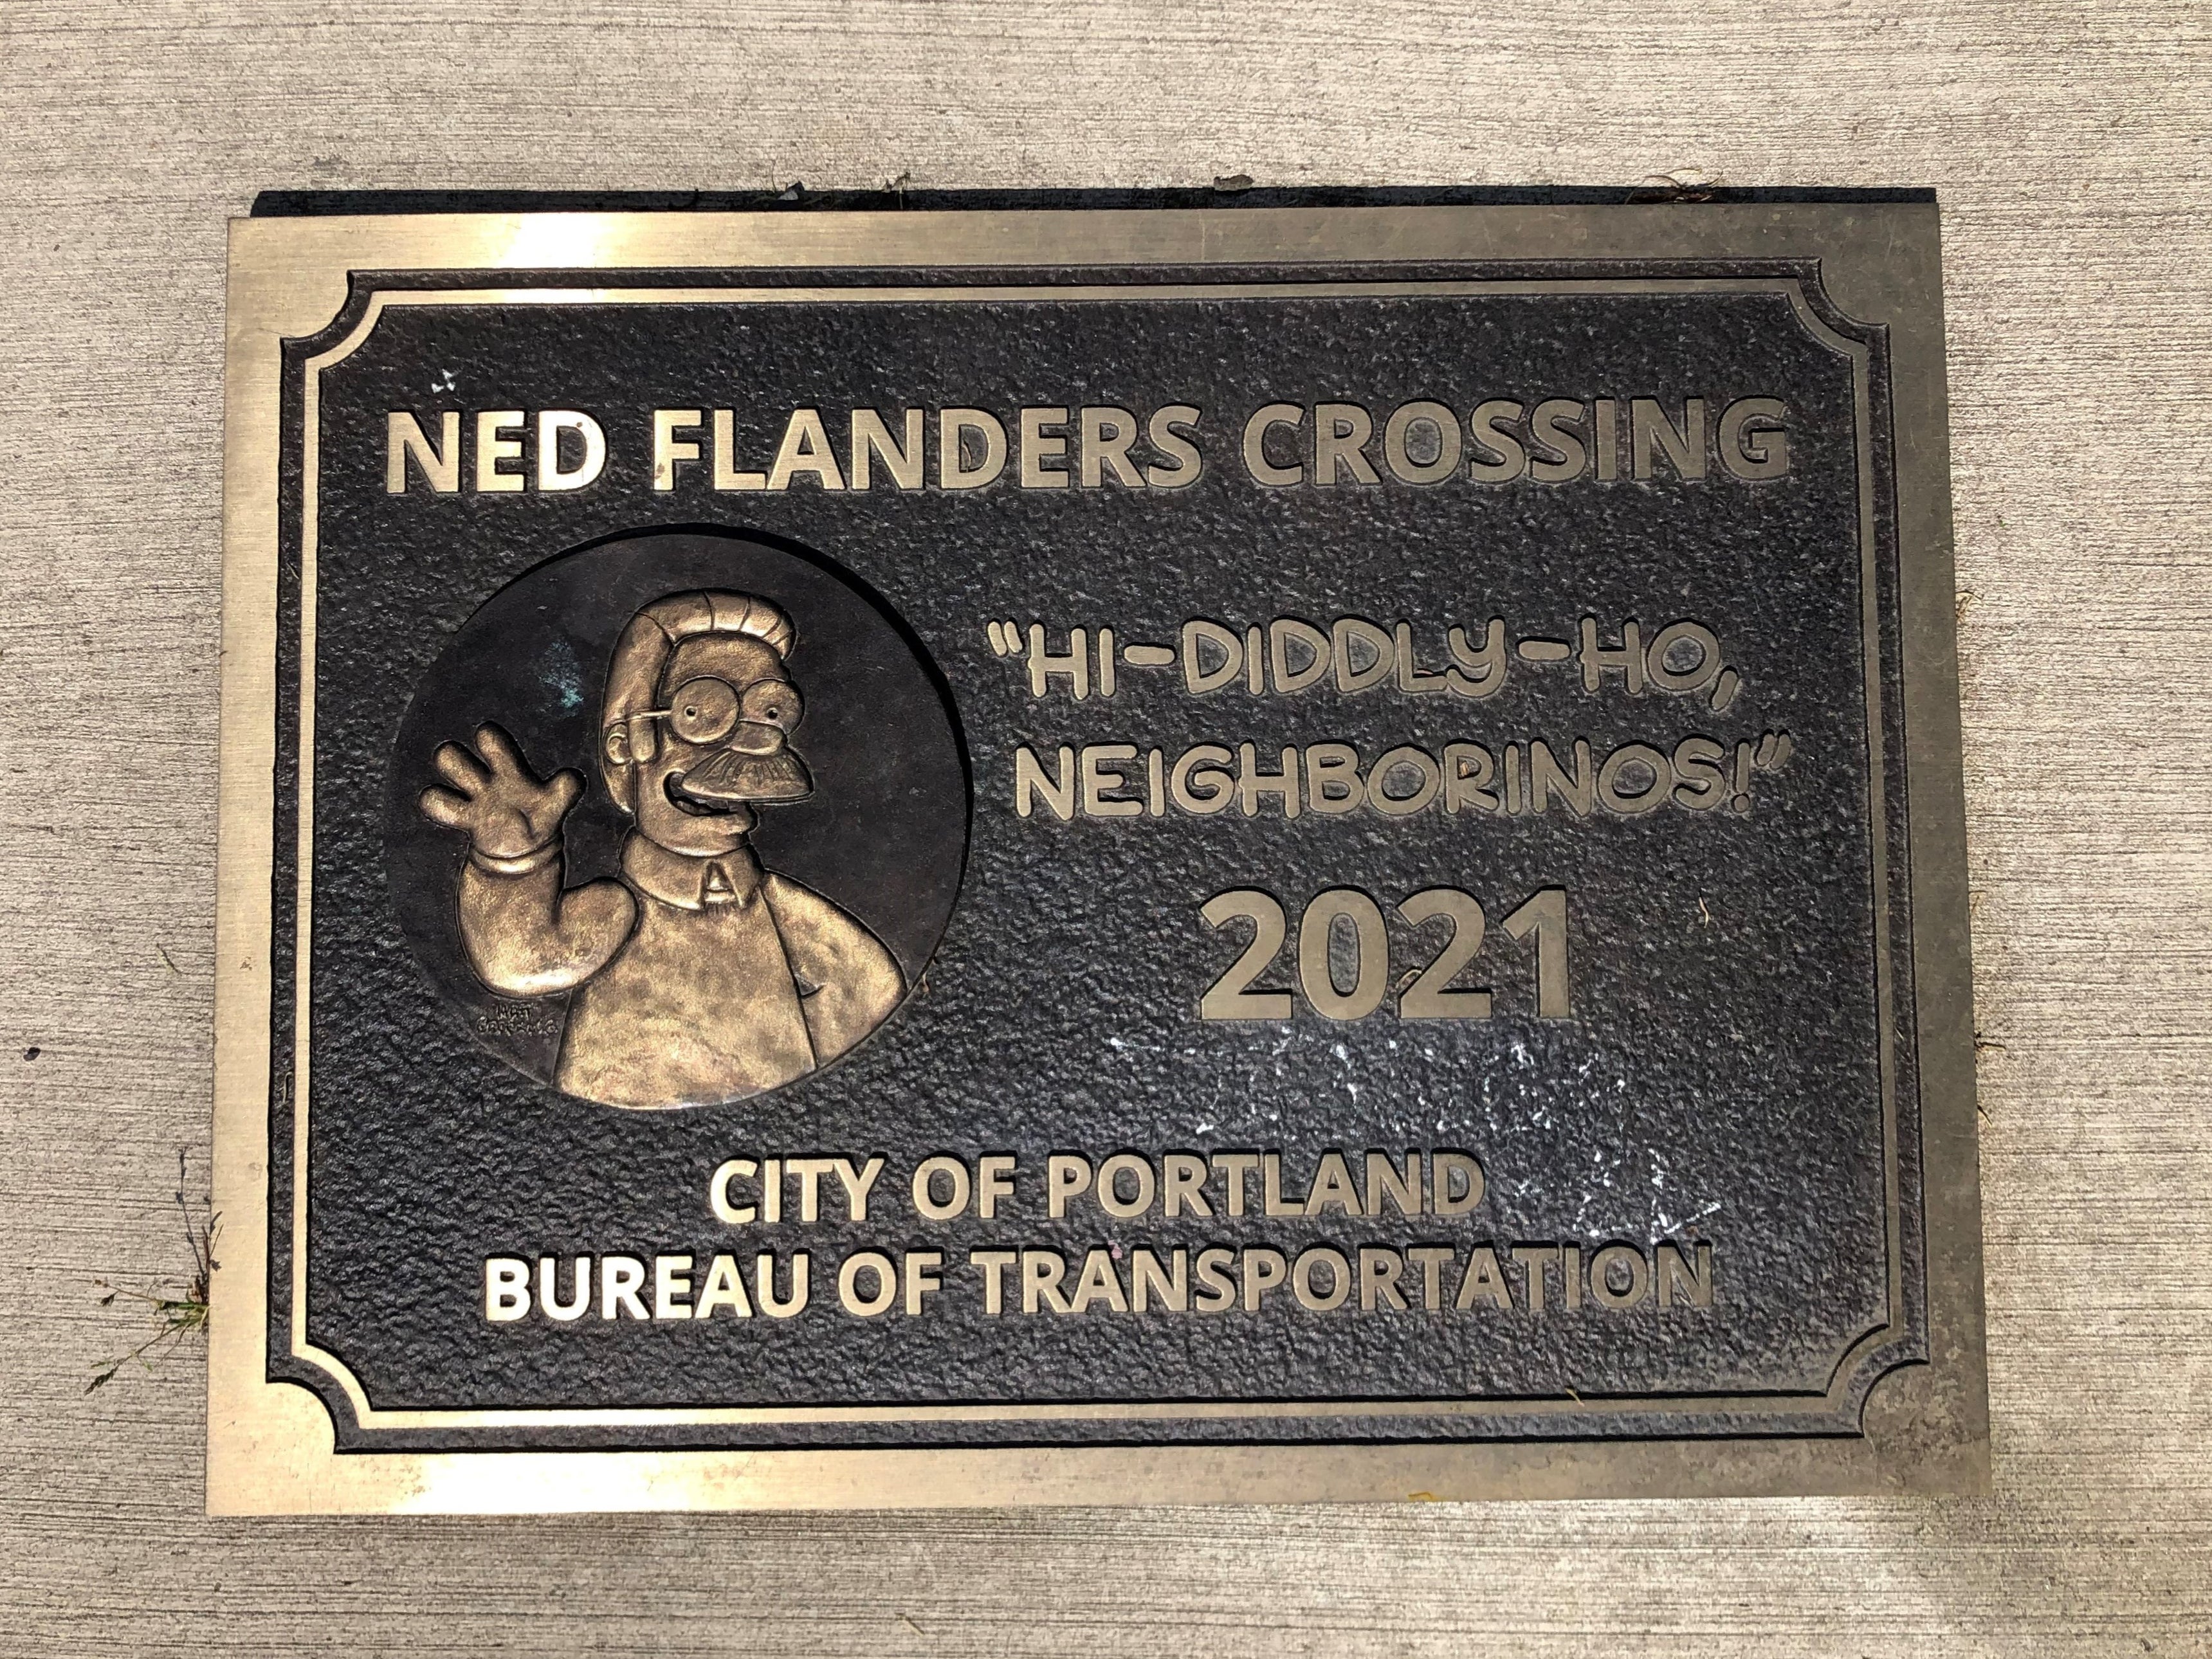 The character of Ned Flanders has been immortalised on a bridge over an interstate